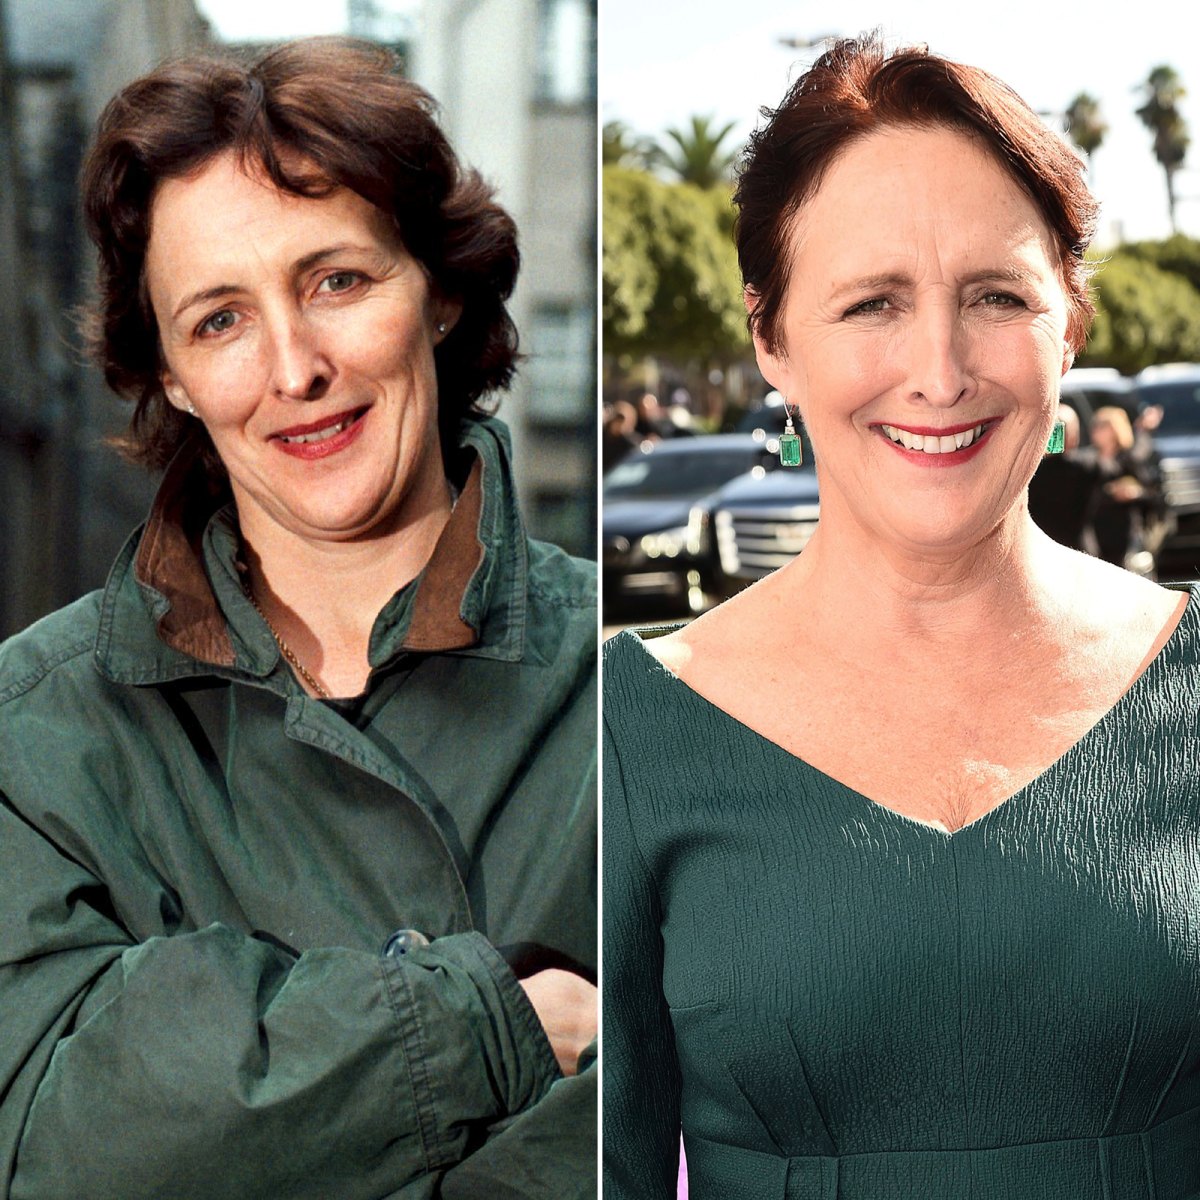 Hot fiona shaw Who is